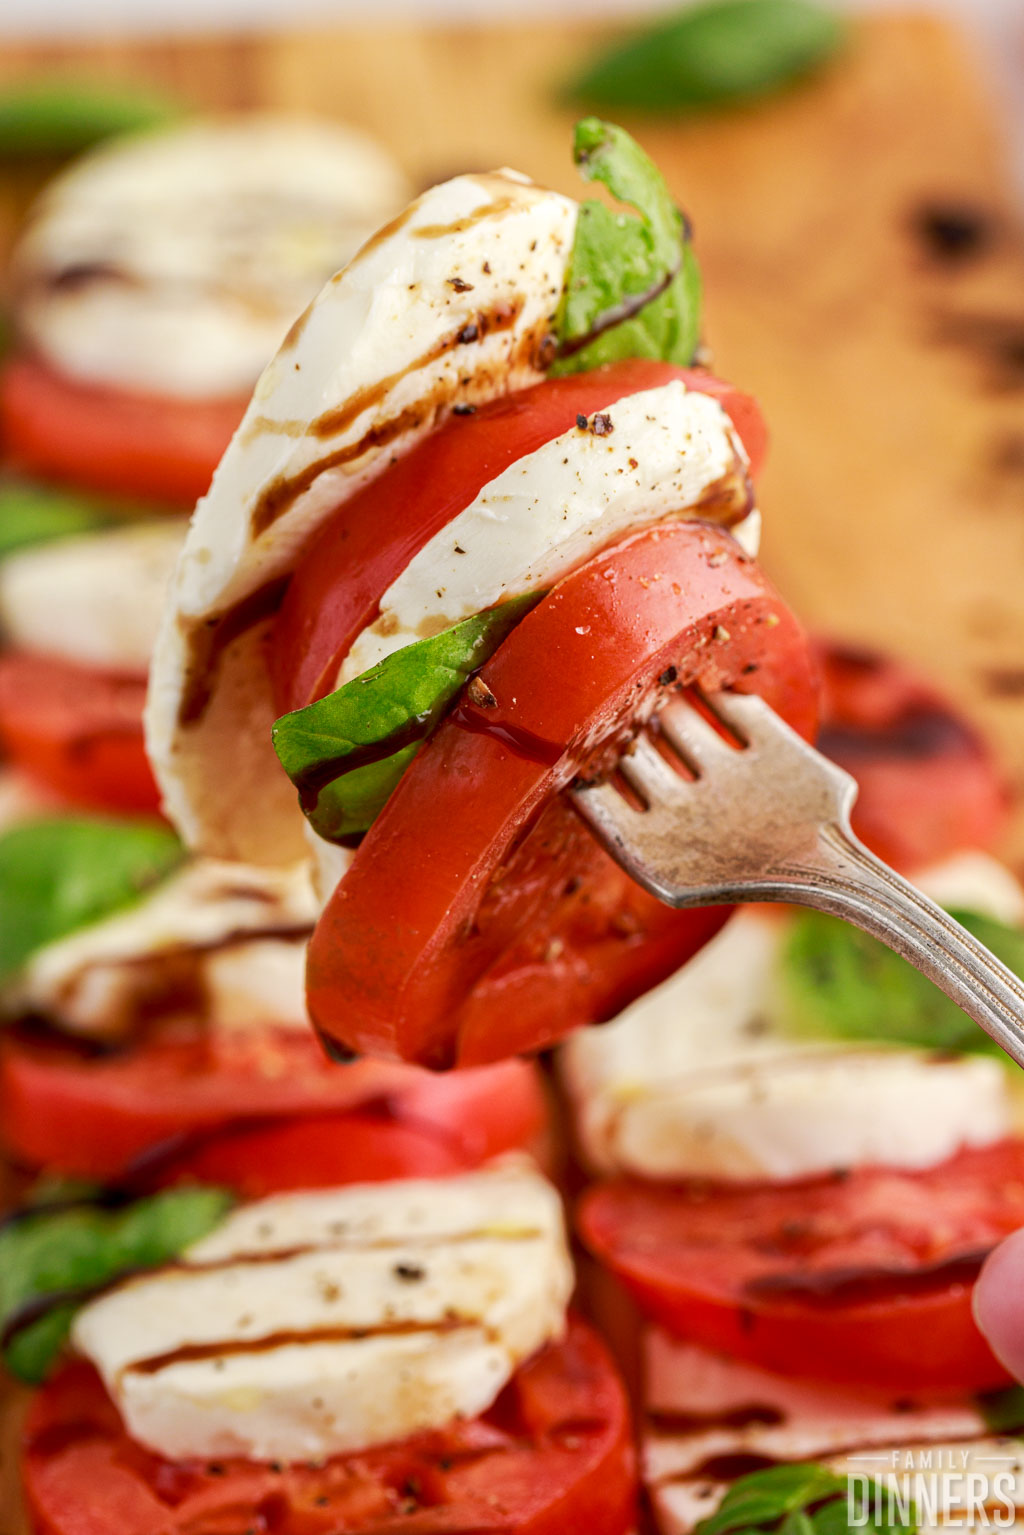 Caprese salad (tomato and mozzarella nd basil with oil and vinegar stacked on a fork.